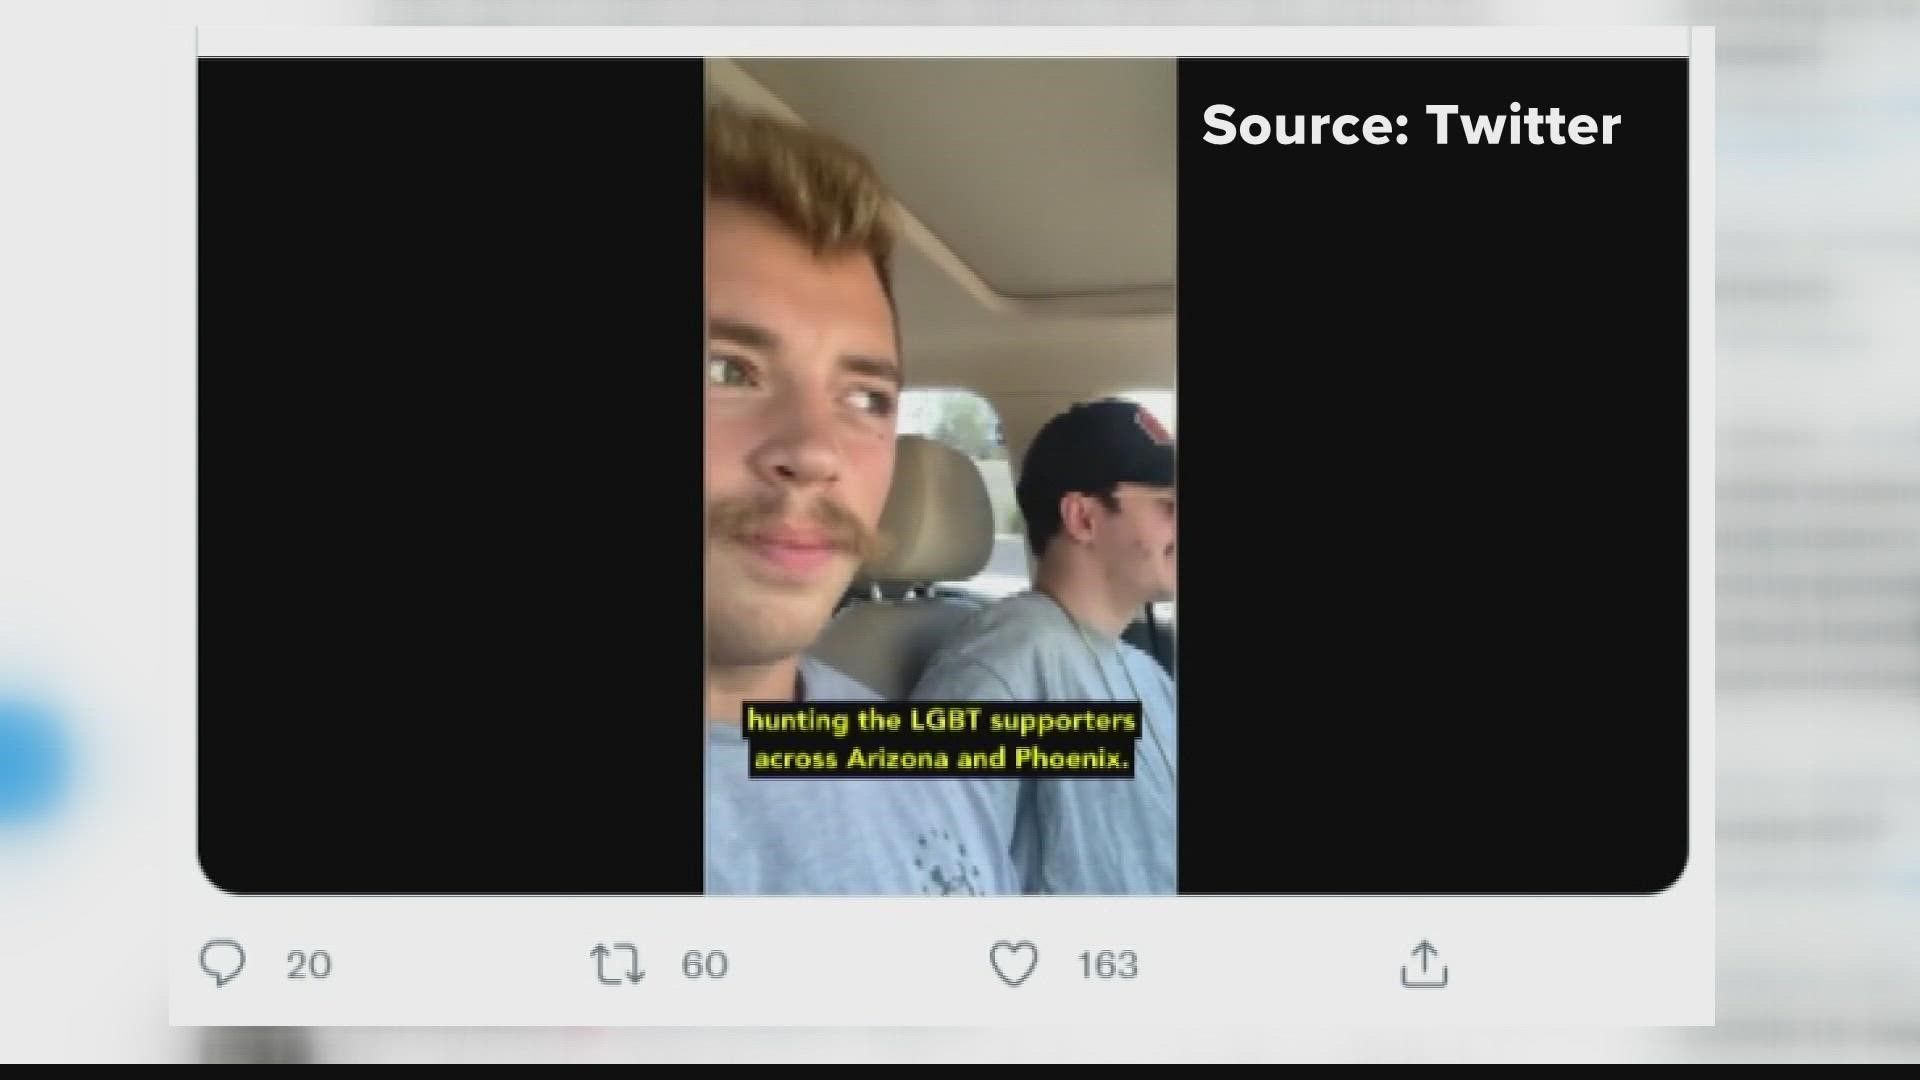 A Phoenix man, Ethan Schmidt Crockett, is not new to social media or police. His actions have raised questions before about what is protected by freedom of speech.